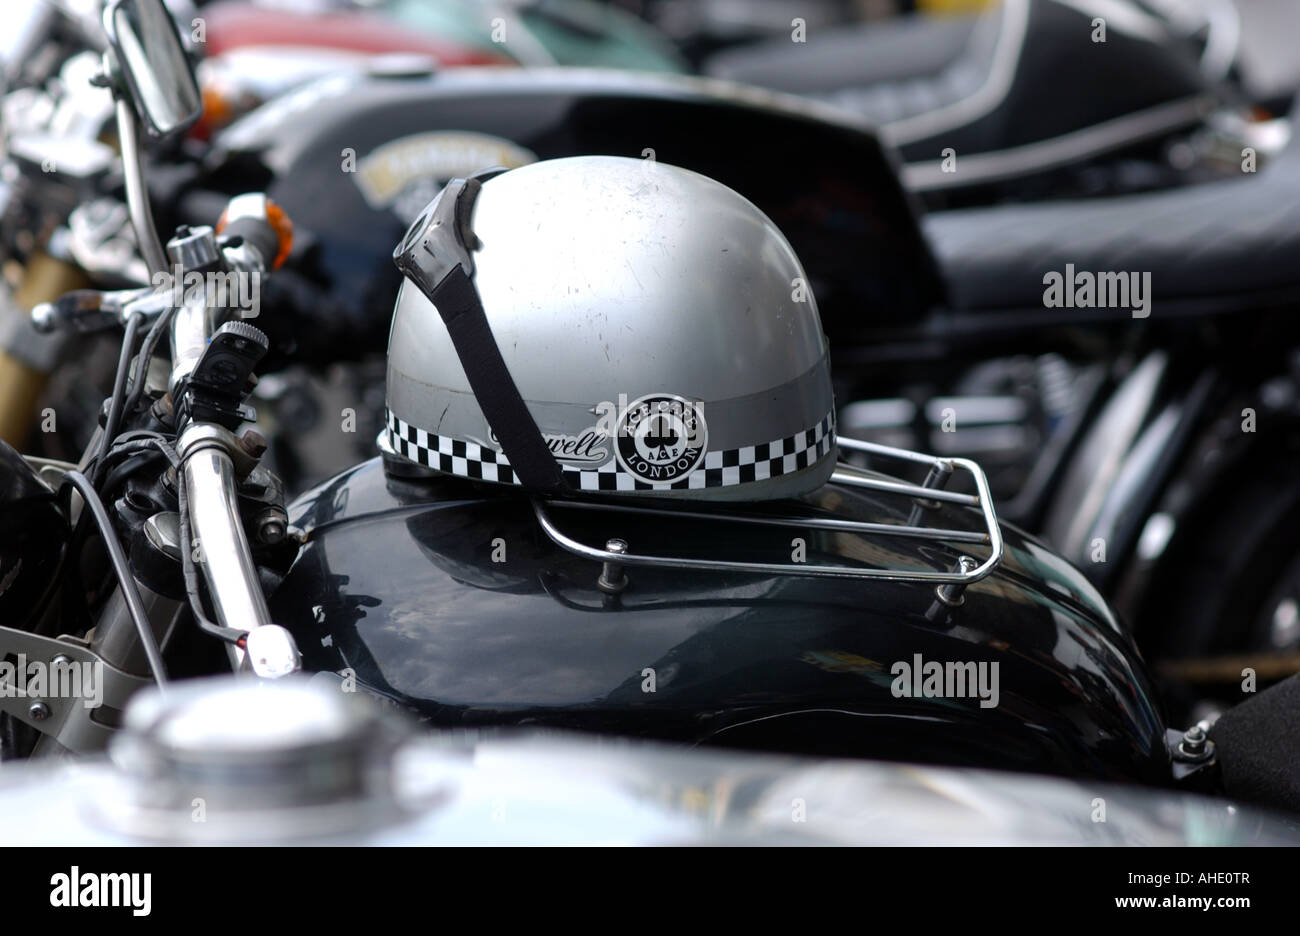 An old fashioned crash helmet at the Ace Cafe reunion motorcycle event in Brighton UK September 2007 Stock Photo